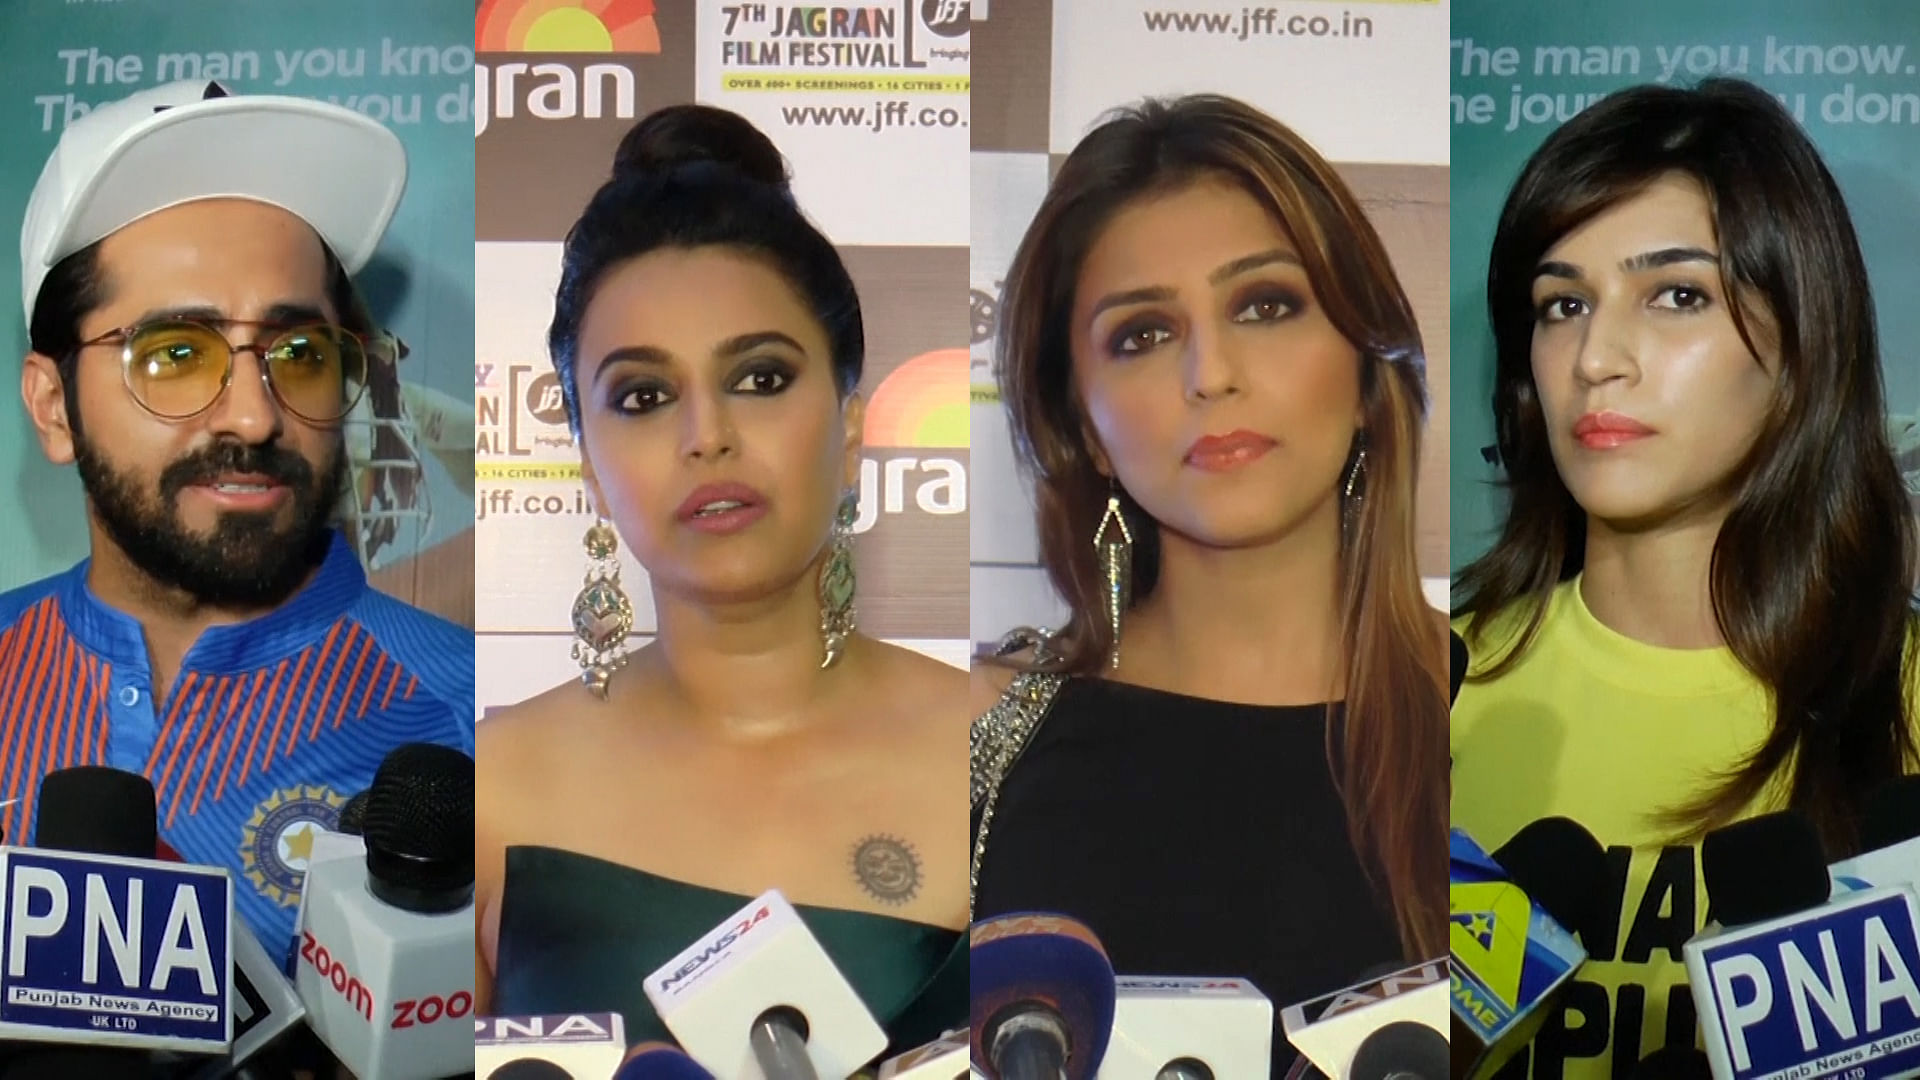 Many Bollywood actors and filmmakers have come out in support of Pakistani performers. (Photo: ANI screengrab)